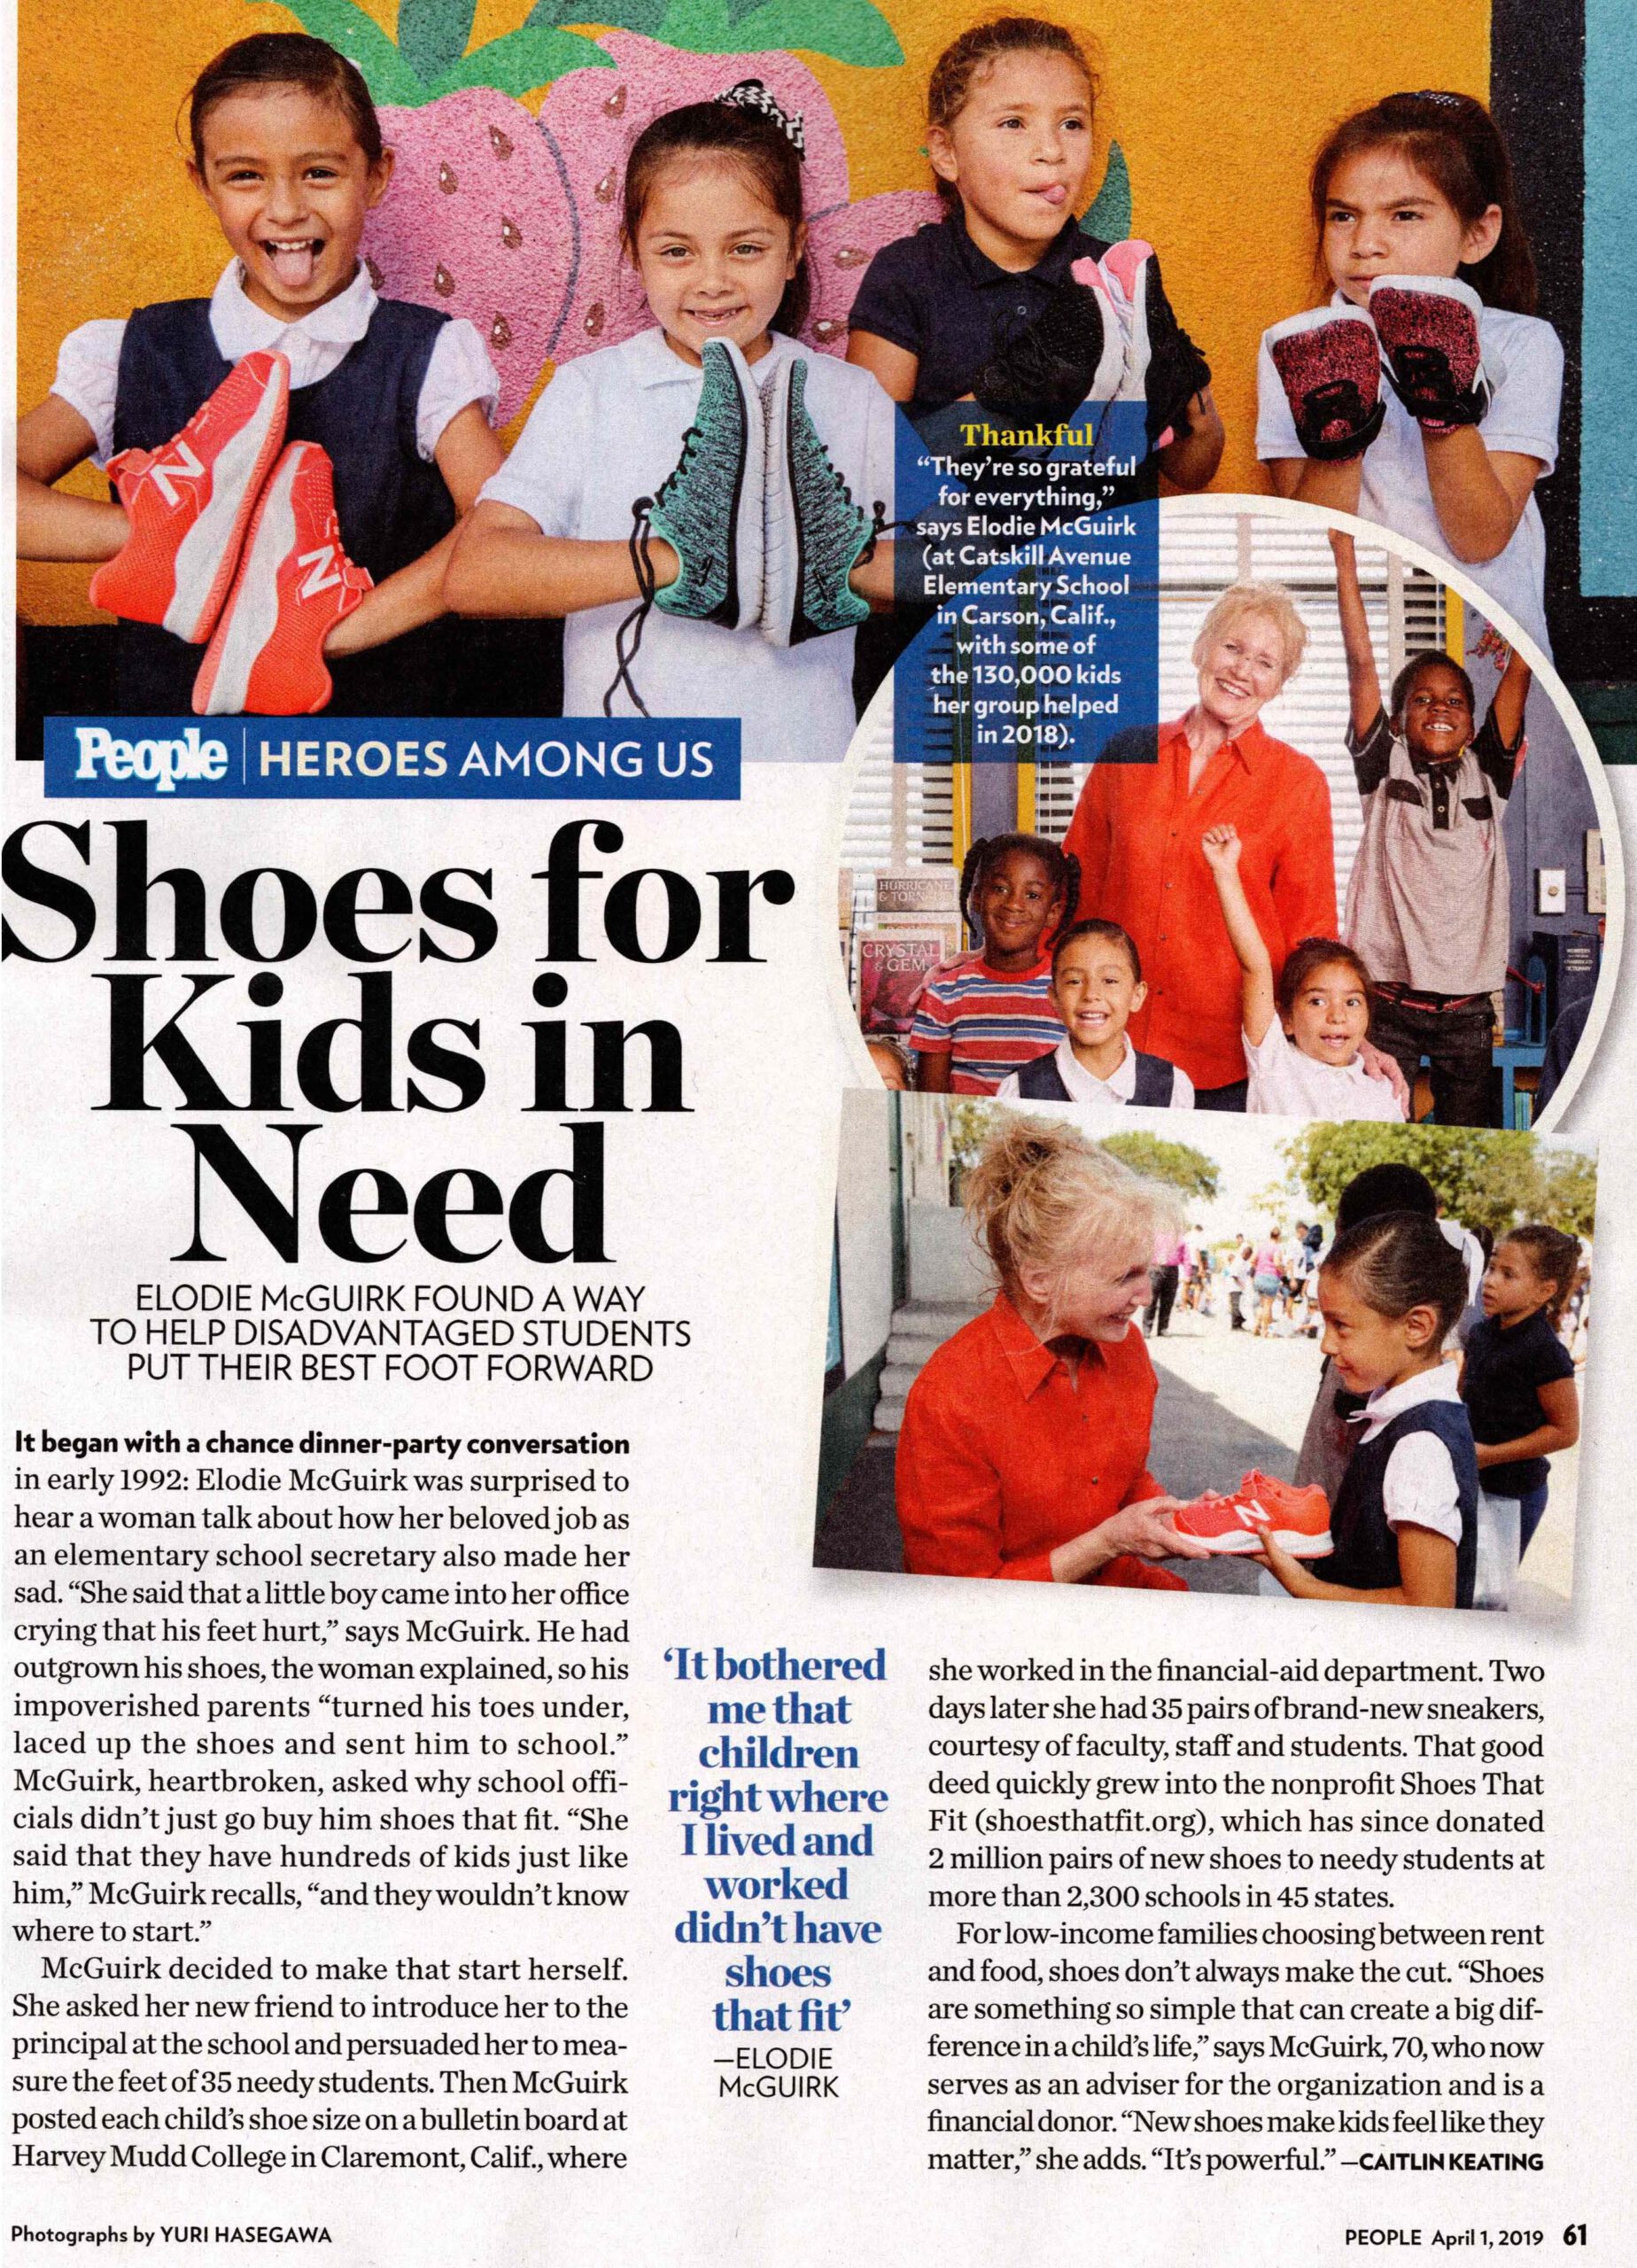 People Magazine – Shoes for Kids in Need